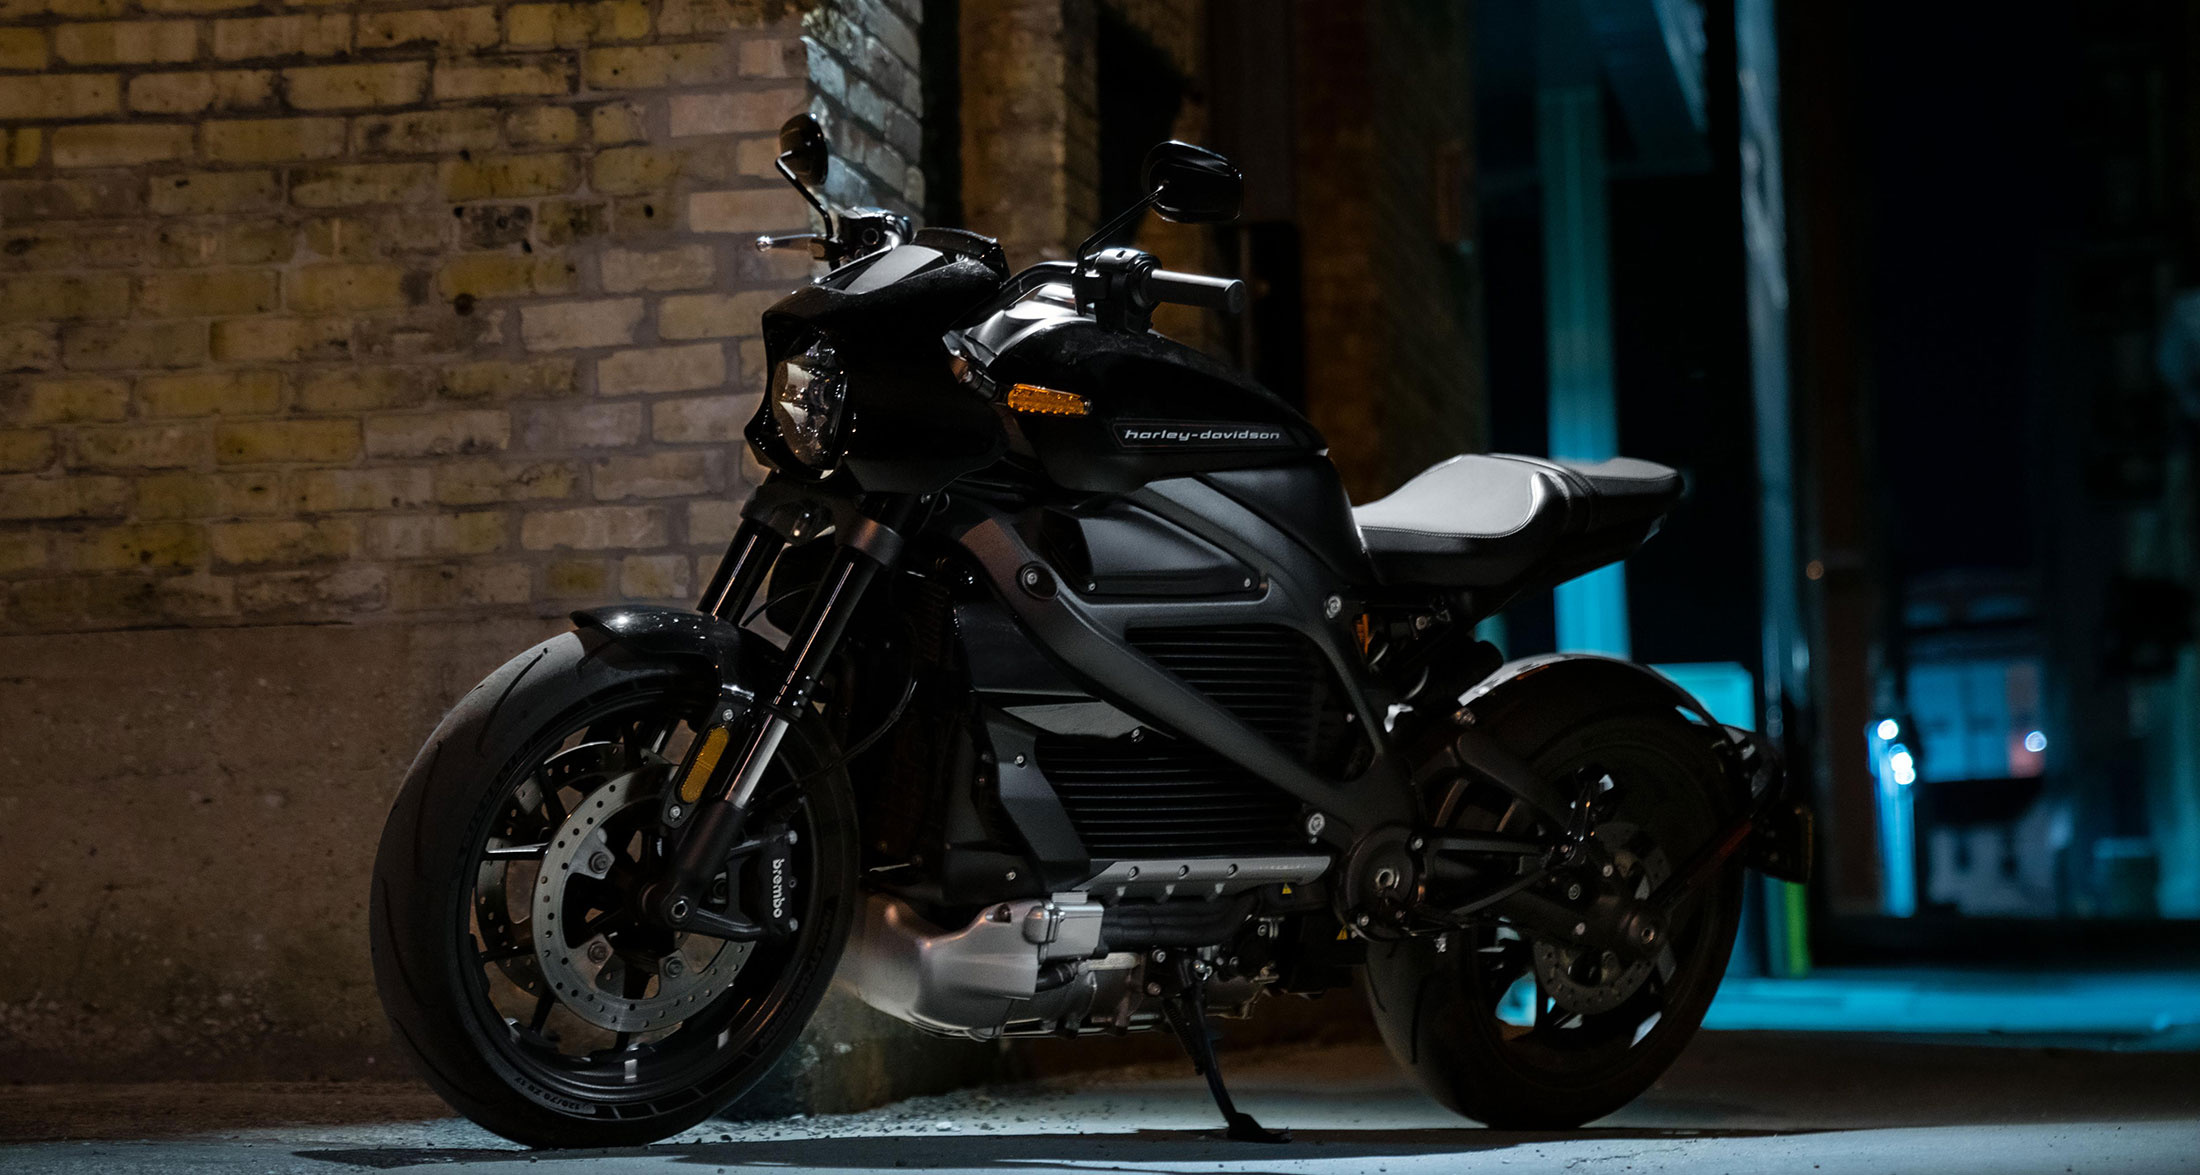 Harley-Davidson Livewire, Bikes and more, Cutting-edge technology, Motorcycle enthusiasts, 2200x1180 HD Desktop